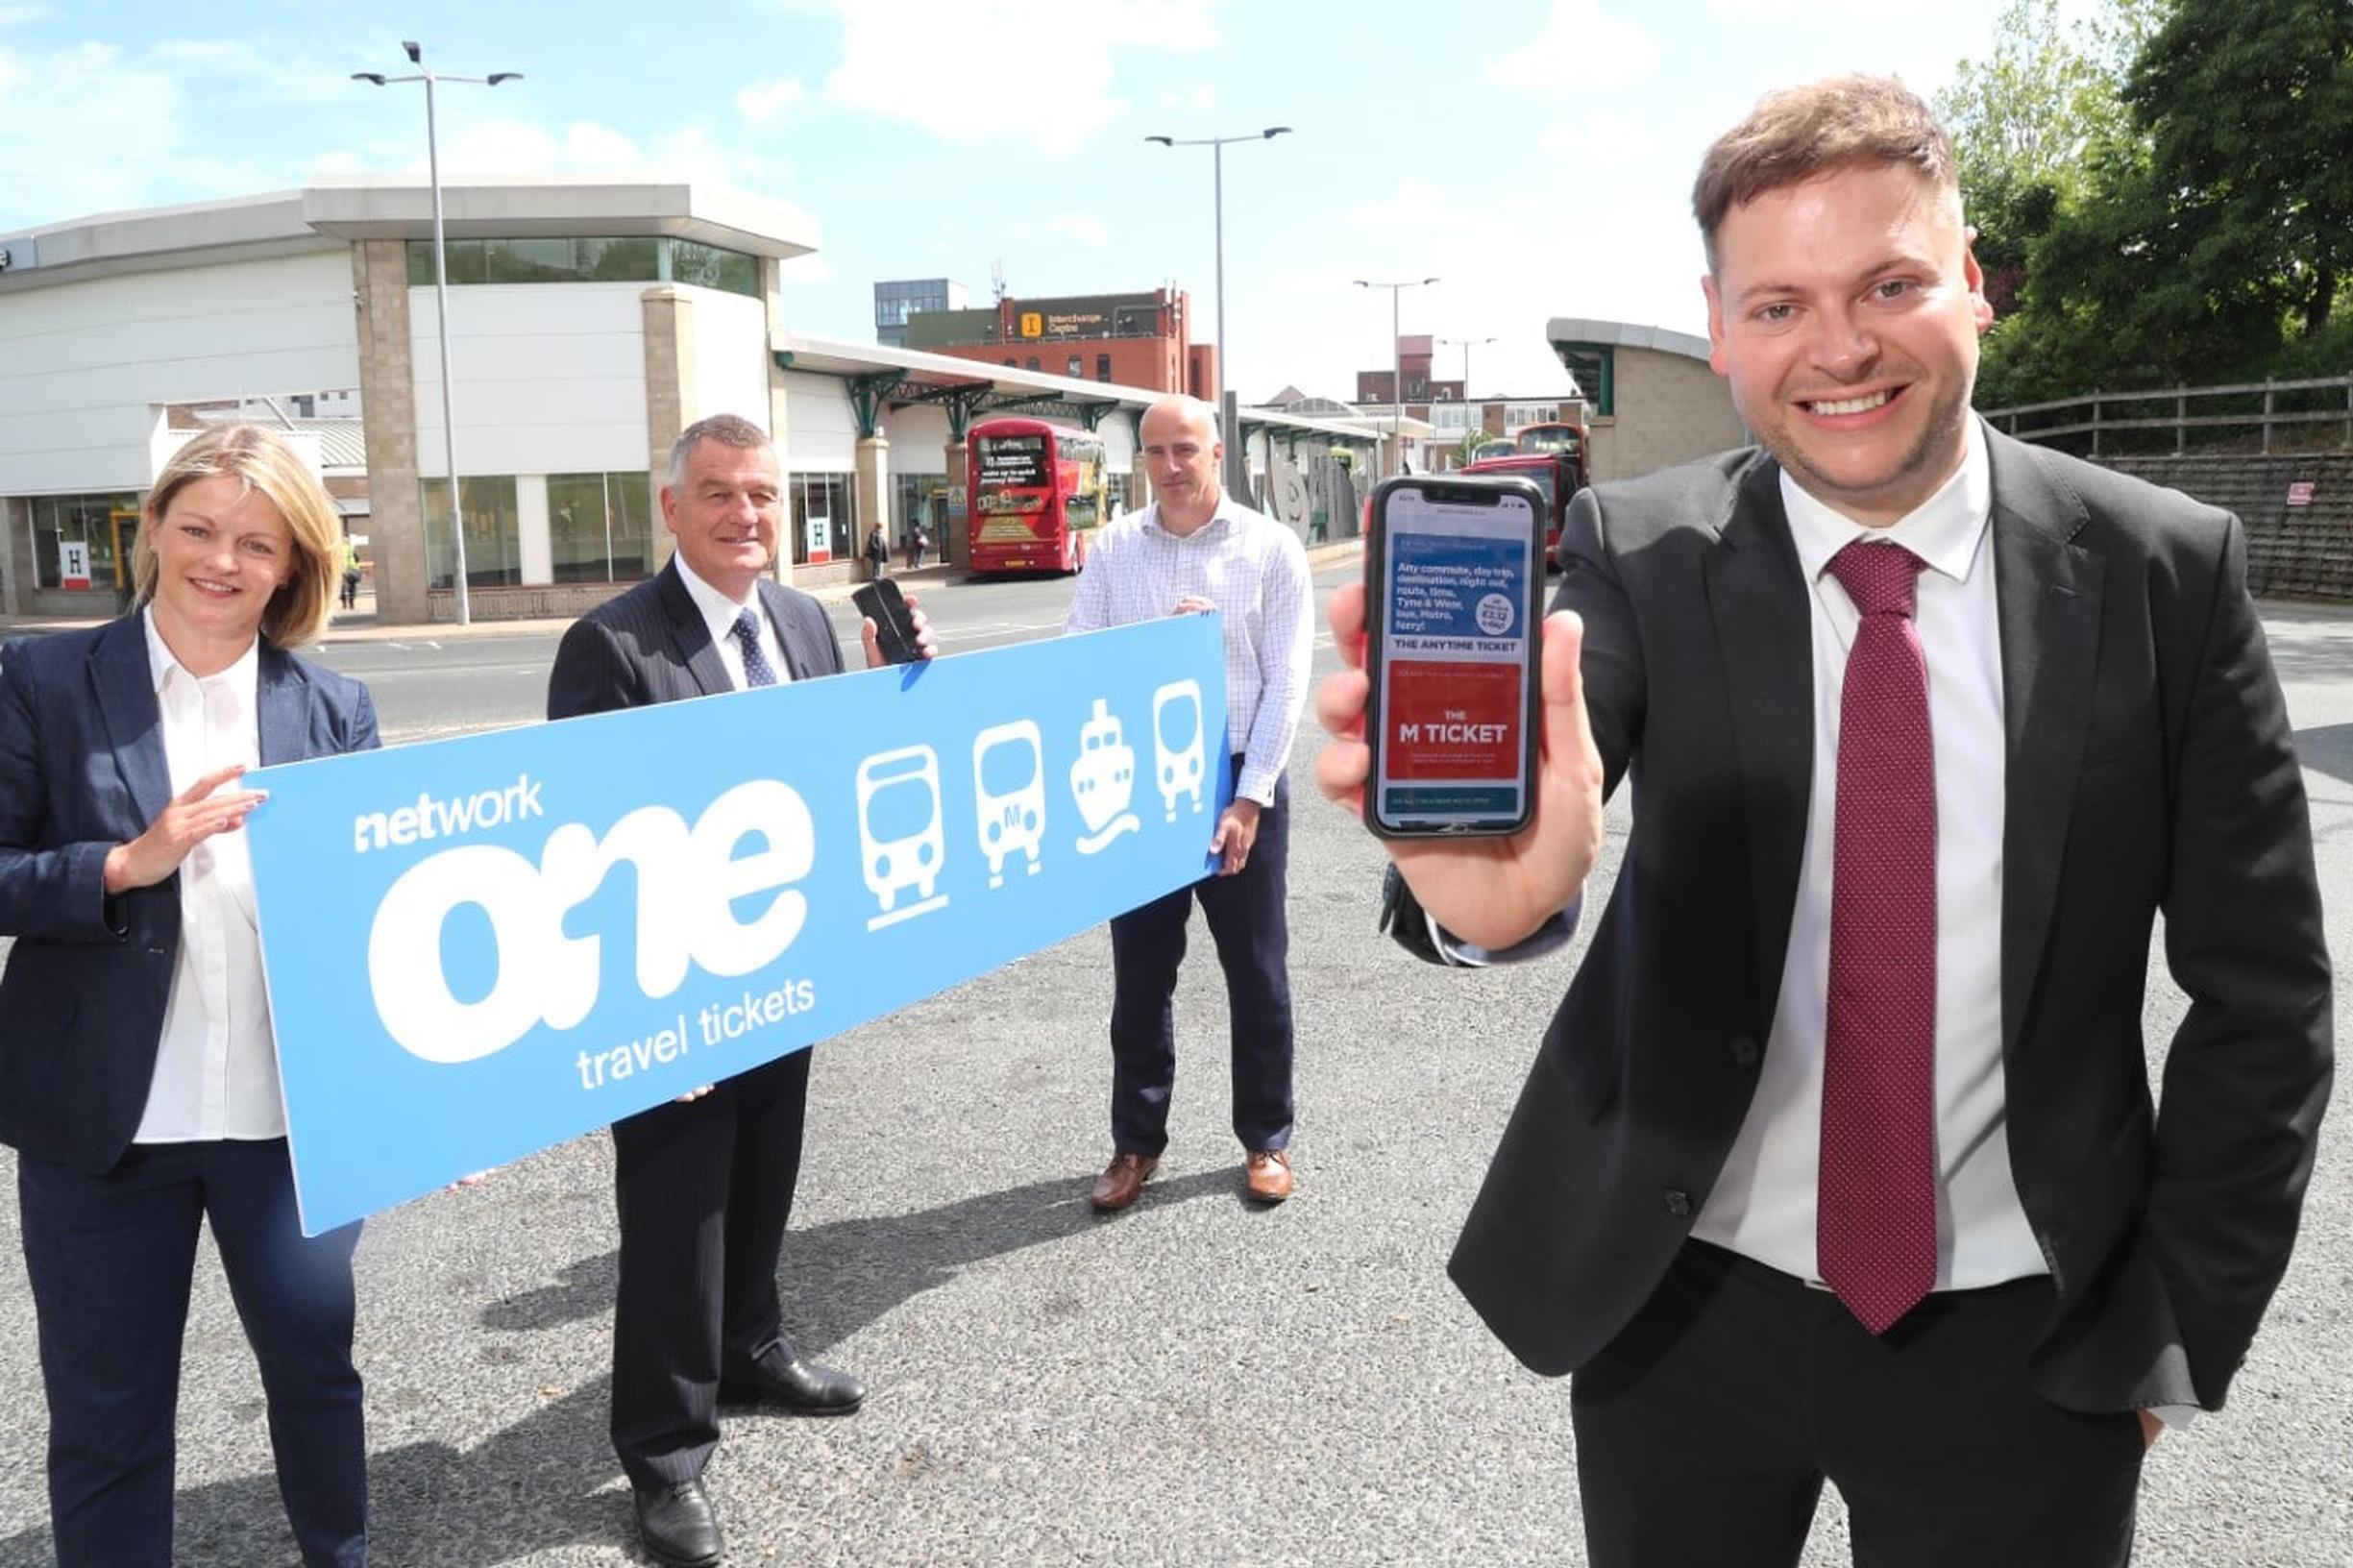 TfN Strategy supports multimodal ticketing and modal change